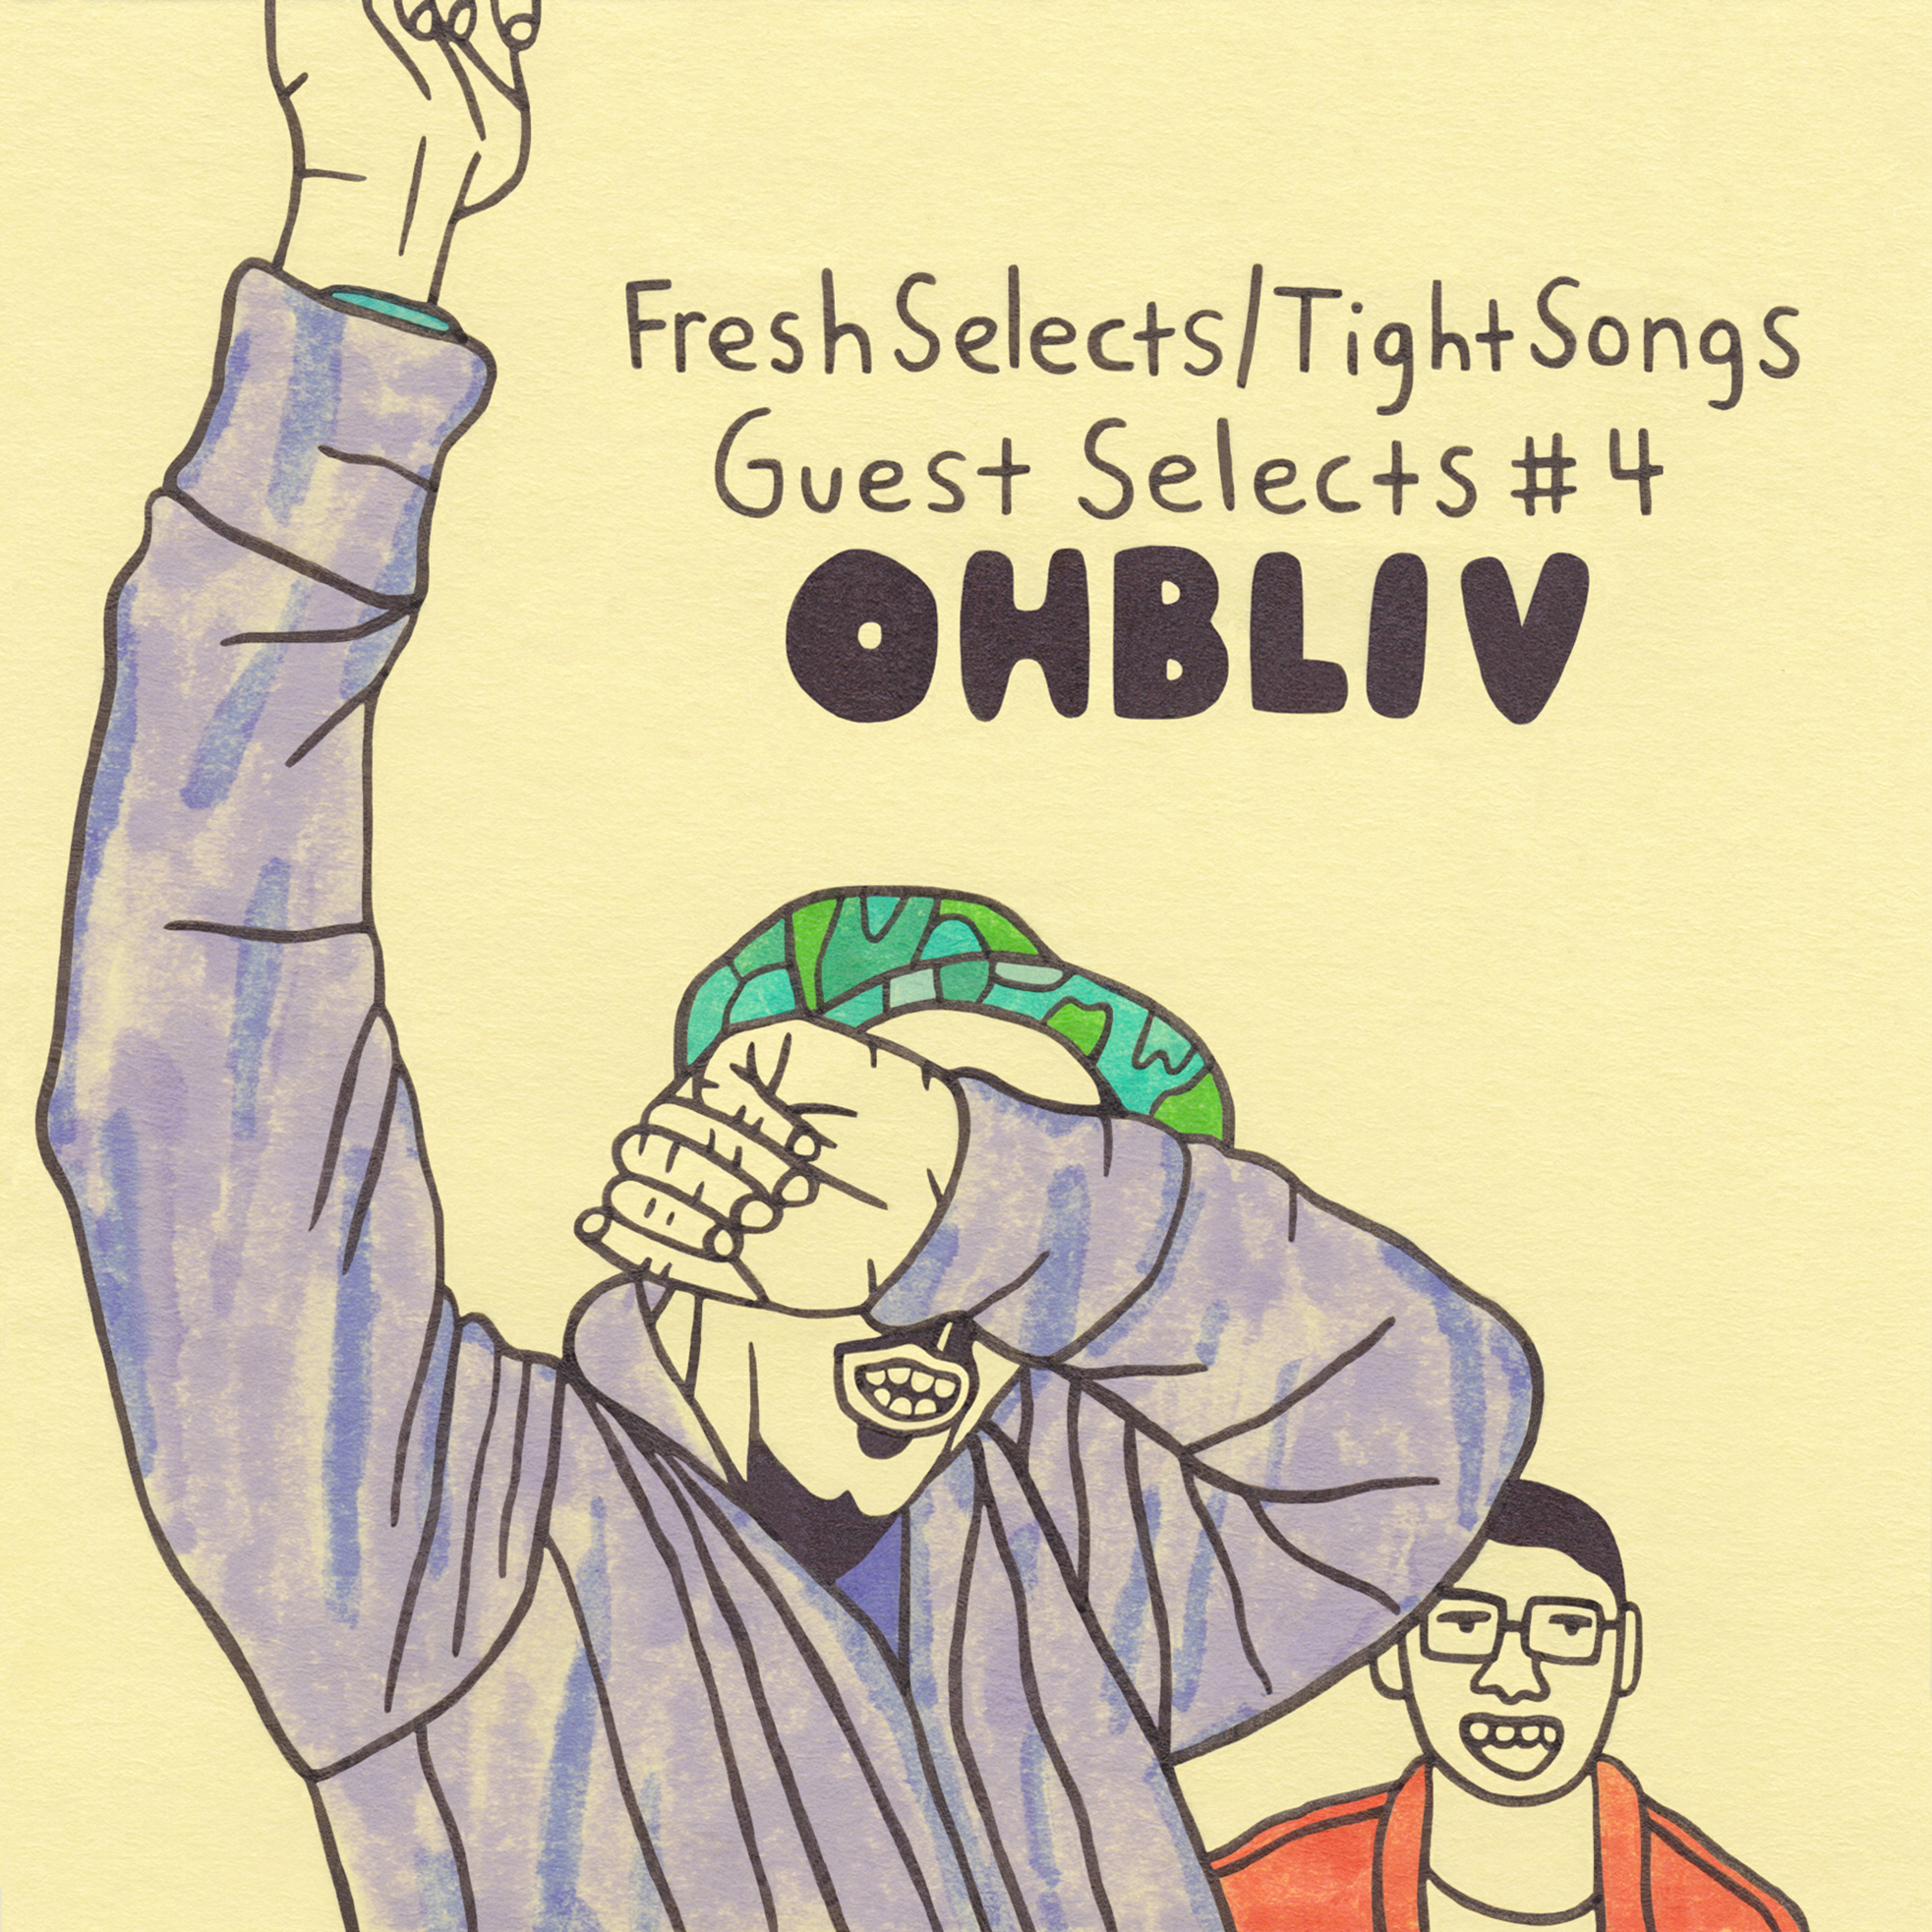 Fresh Selects / Tight Songs – Guest Selects #4: Ohbliv